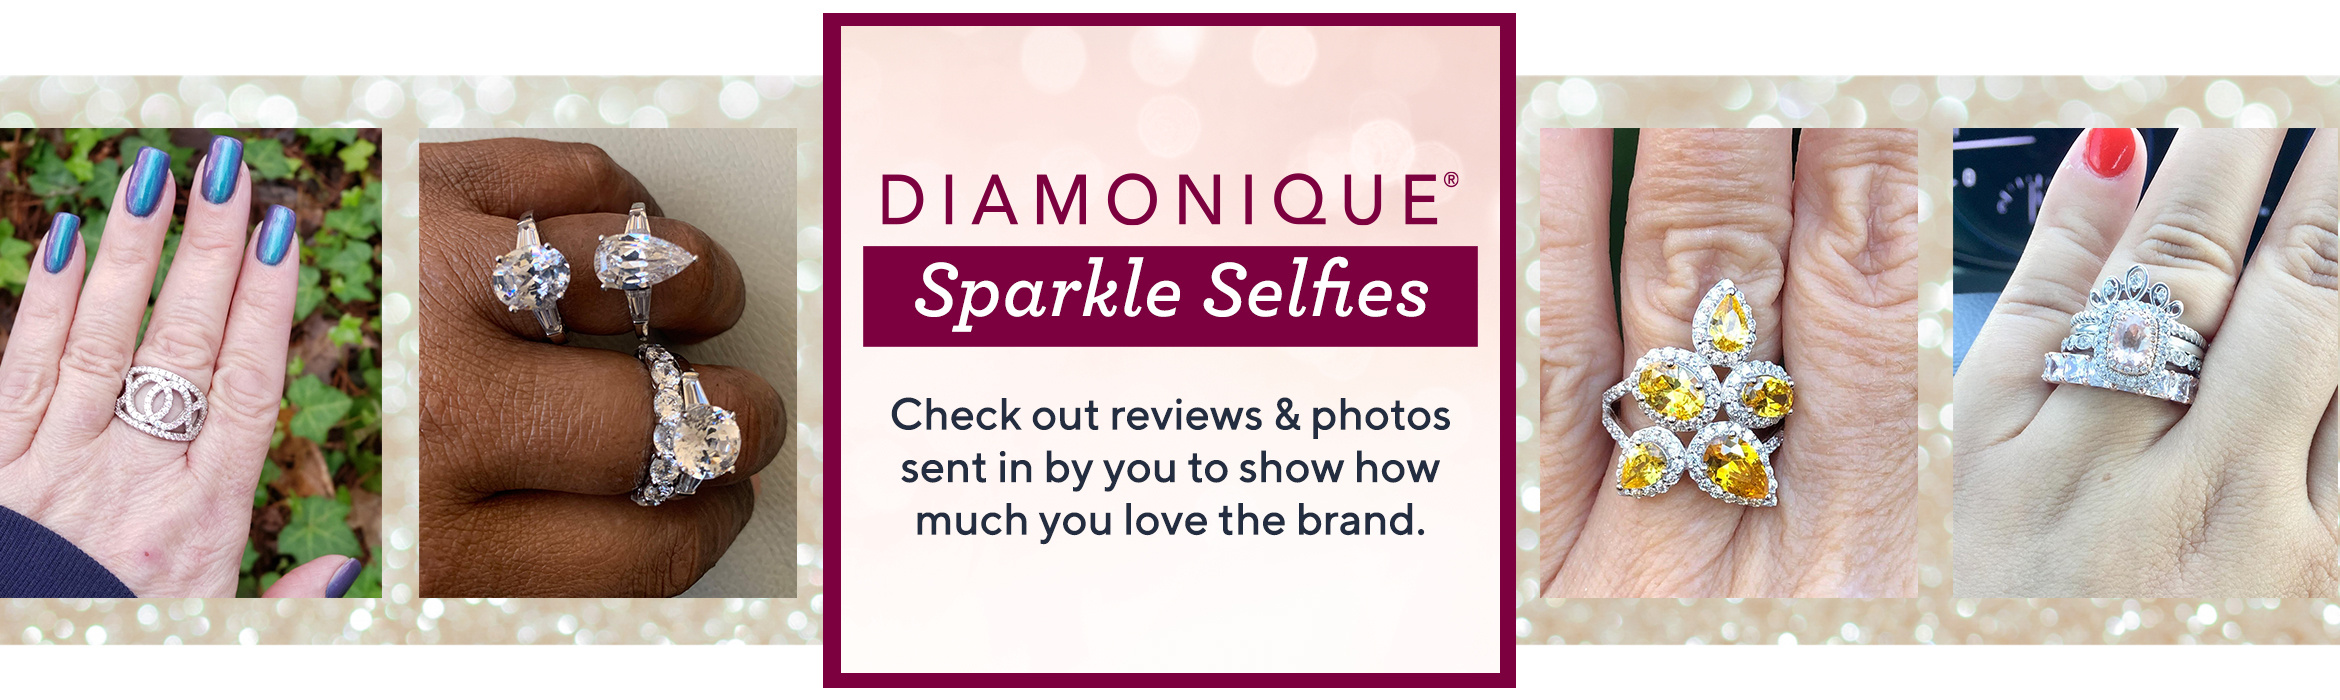  Sparkle Selfies - Check out reviews & photos sent in by you to show how much you love the brand.